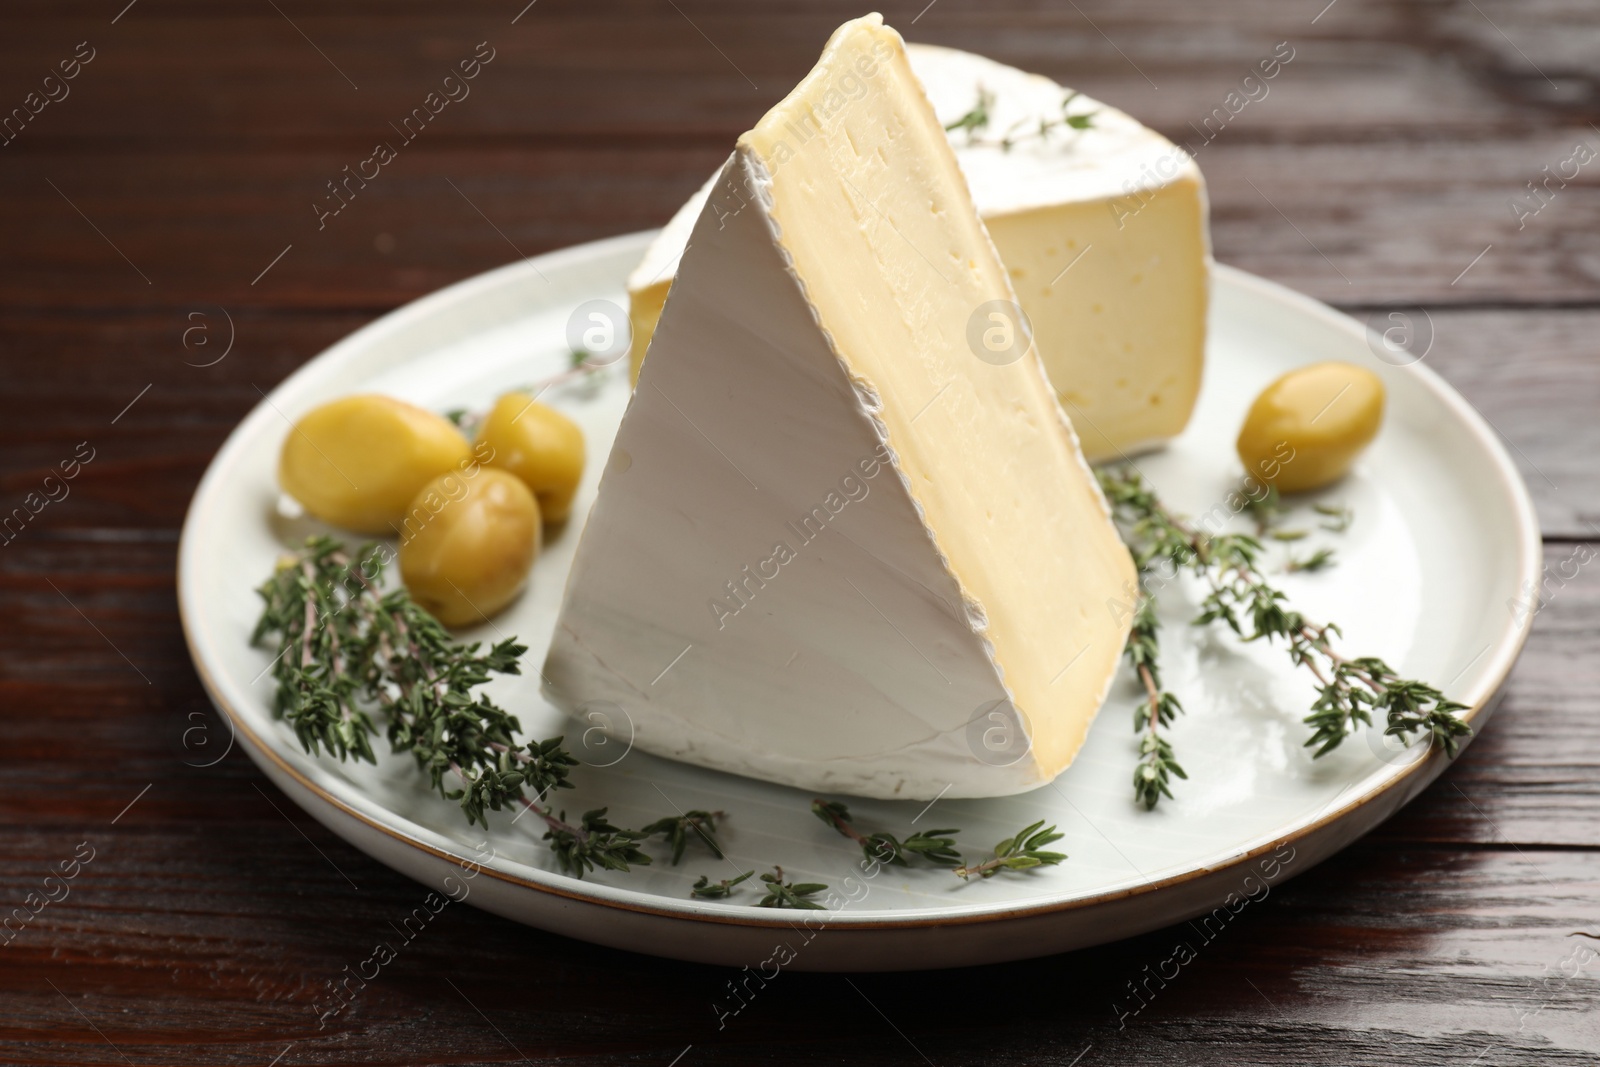 Photo of Plate with pieces of tasty camembert cheese, olives and rosemary on wooden table, closeup